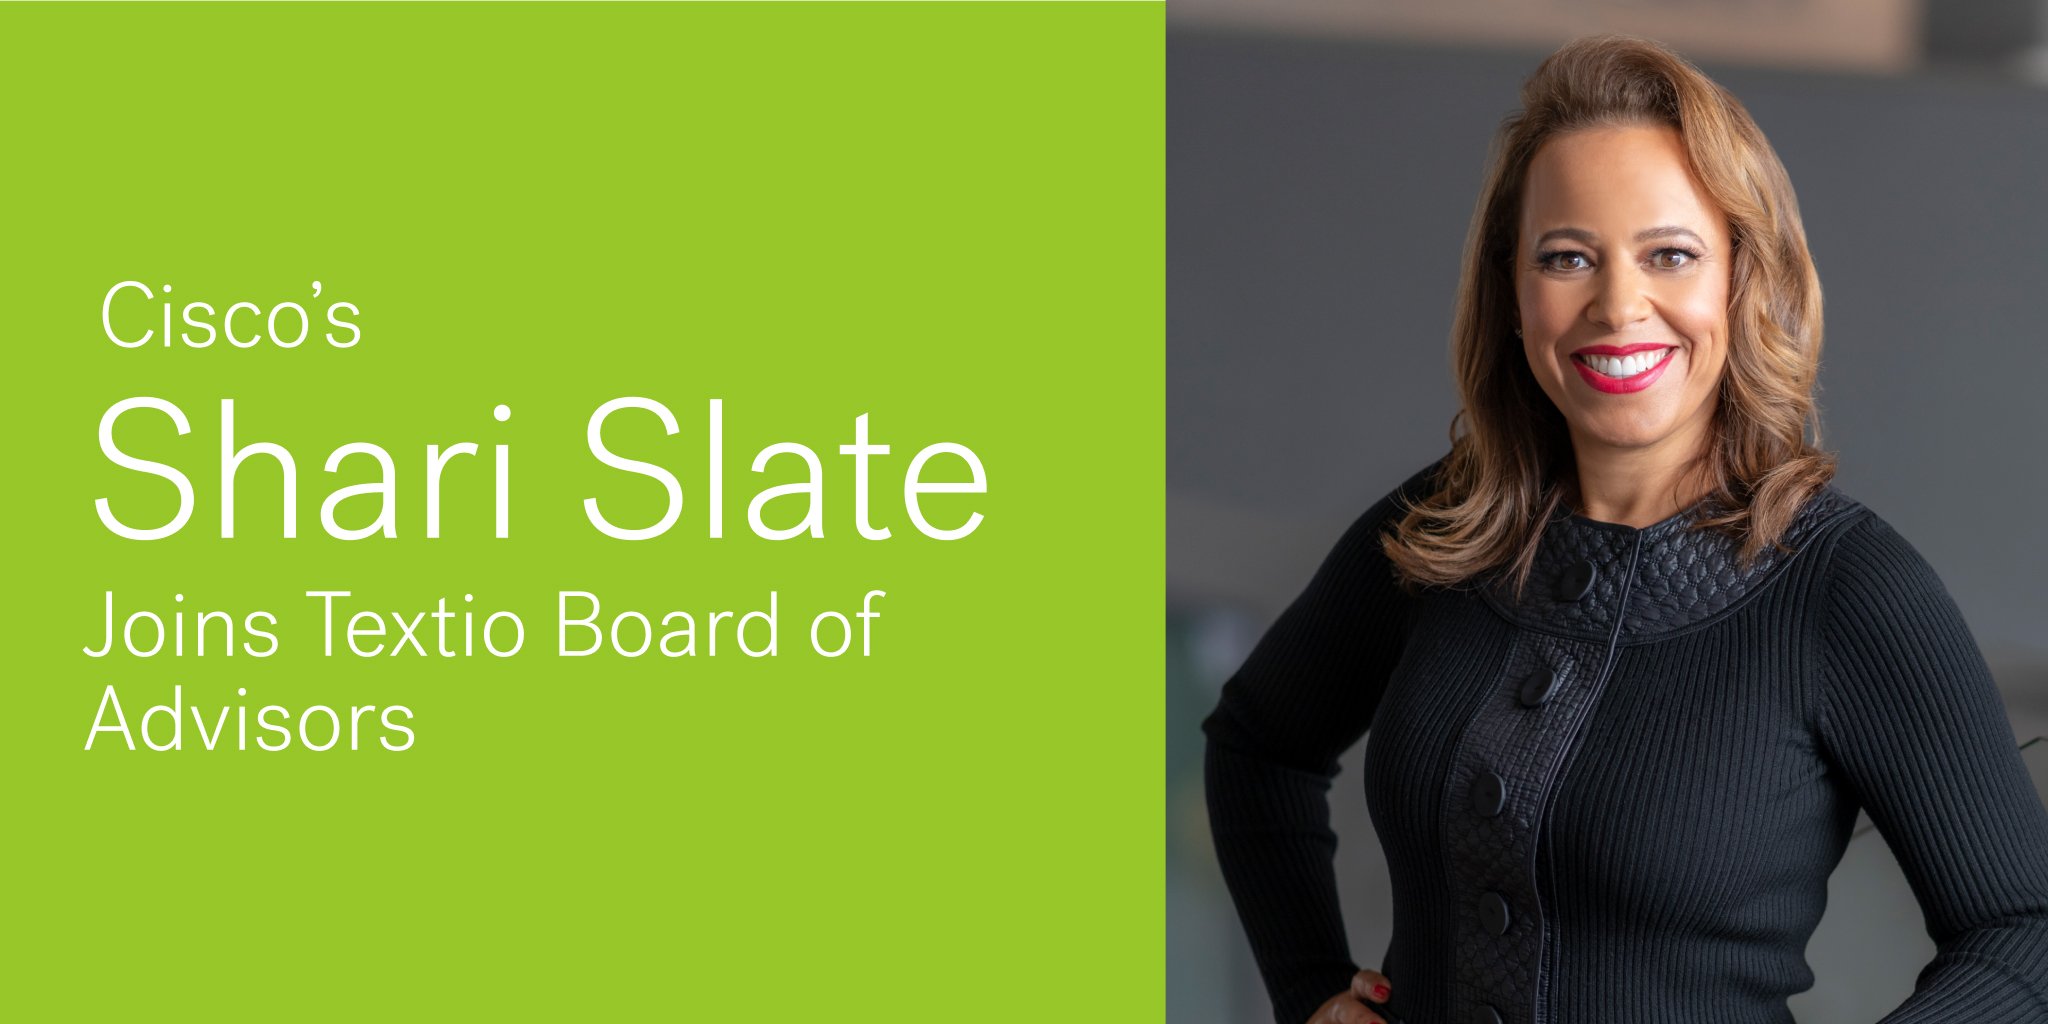 Image of Shari Slate next to text on green background "Cisco